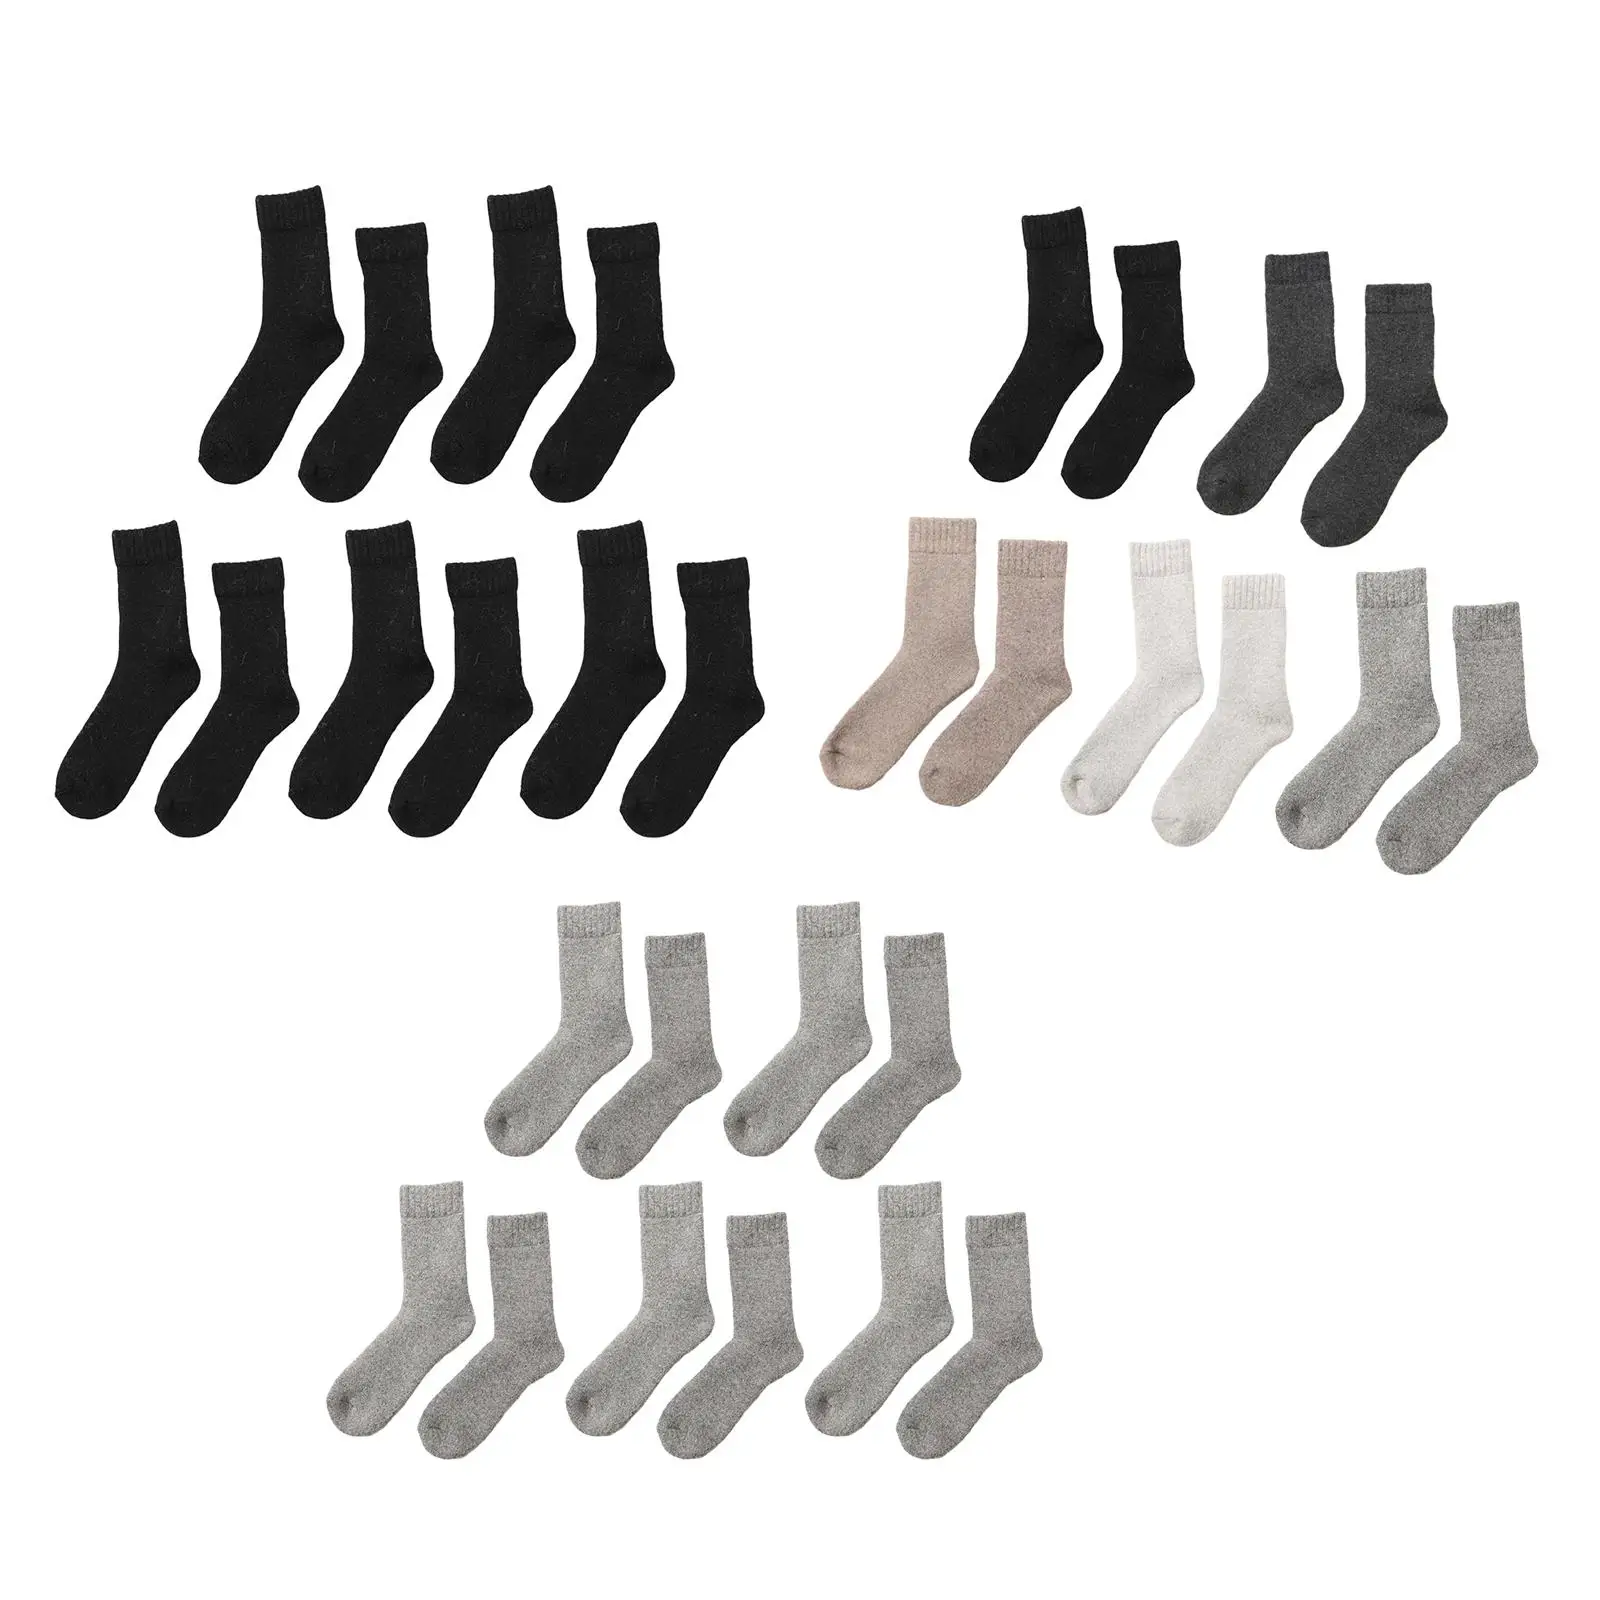 

5 Pairs Men Socks, Fashion Winter Warm Thick Cozy Socks, Cold Weather Socks for